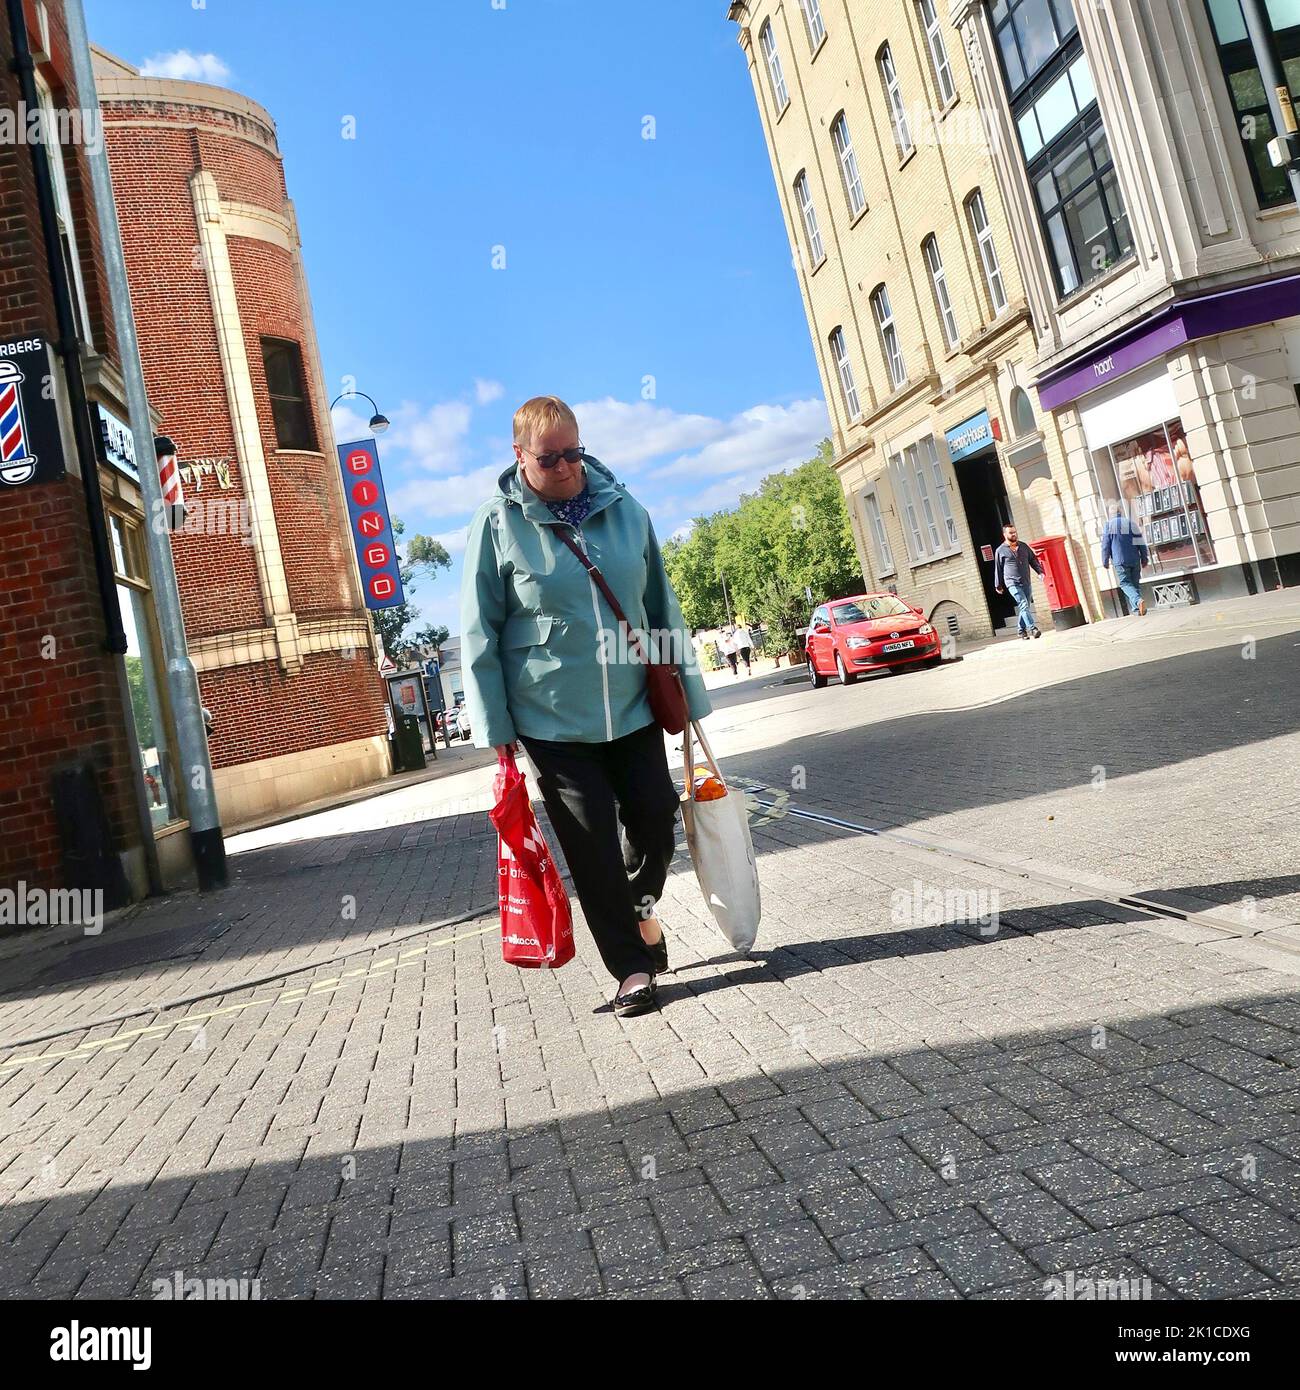 Ipswich, Suffolk, UK - 17 September 2022 : Middle aged lady walking with shopping bags towards the Tower Ramparts bus stops. Saturday afternoon. The Bingo hall is behind her. Stock Photo